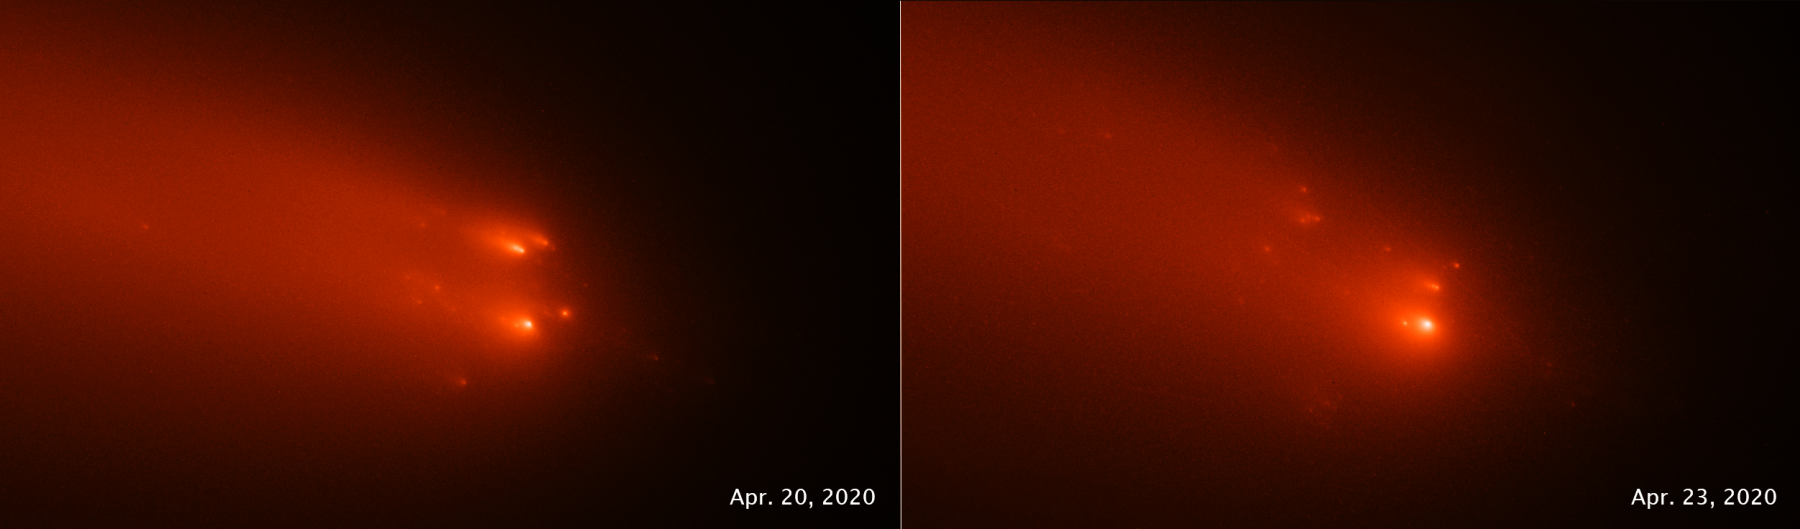 Images of comet Atlas from three days apart show the breakup of the nucleus of the comet. Credit: Science: NASA, ESA, Quanzhi Ye (UMD); Image Processing: Alyssa Pagan (STScI)